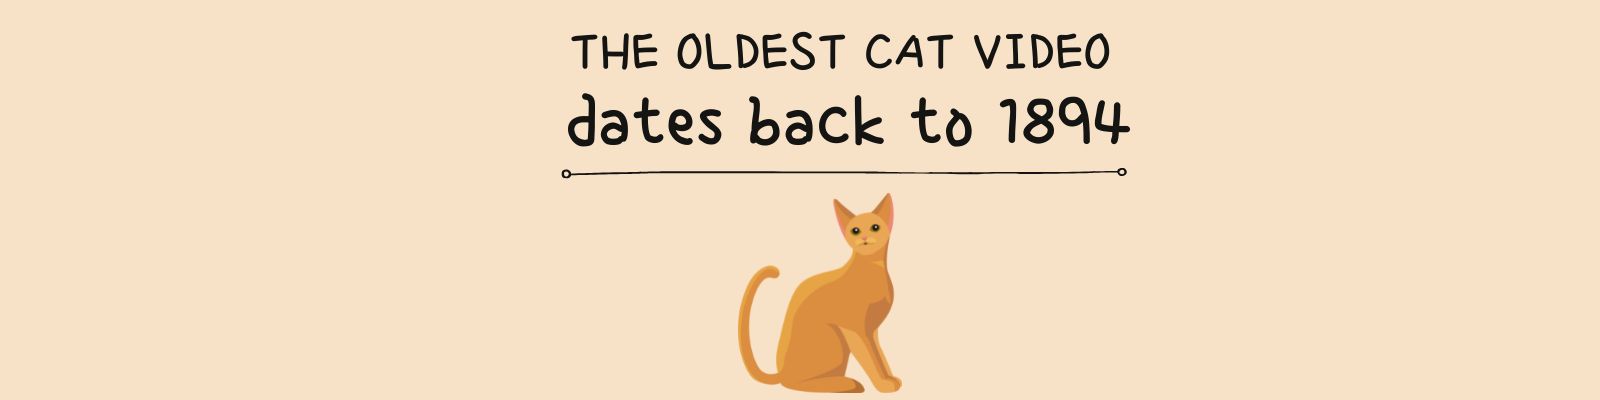 fact about YouTube cat videos 